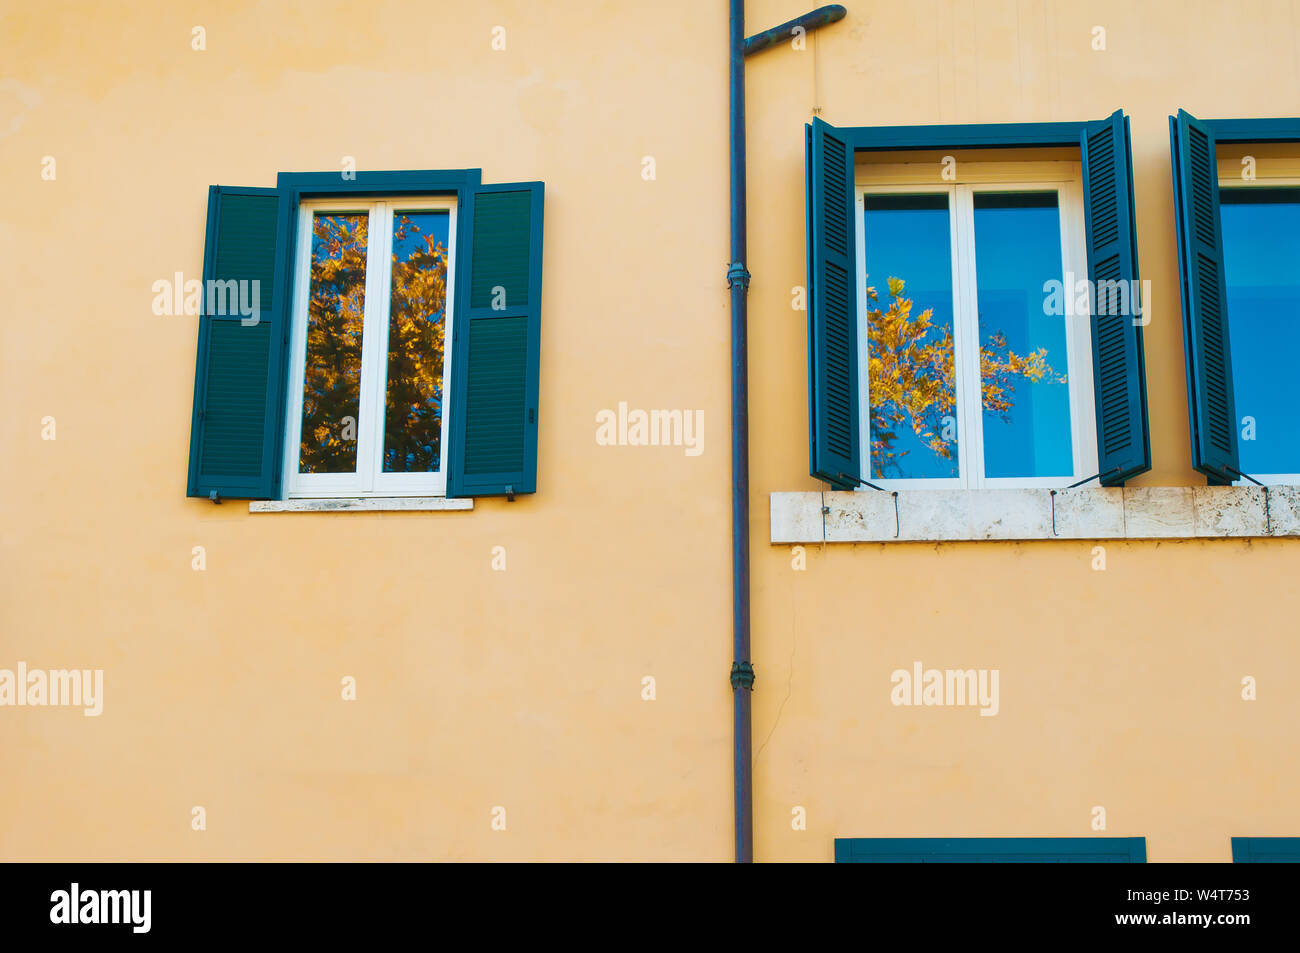 Two windows with dark-green shutters on a plain yellow wall. Reflection of blue sky and yellow tree branches. Rome, Italy Stock Photo